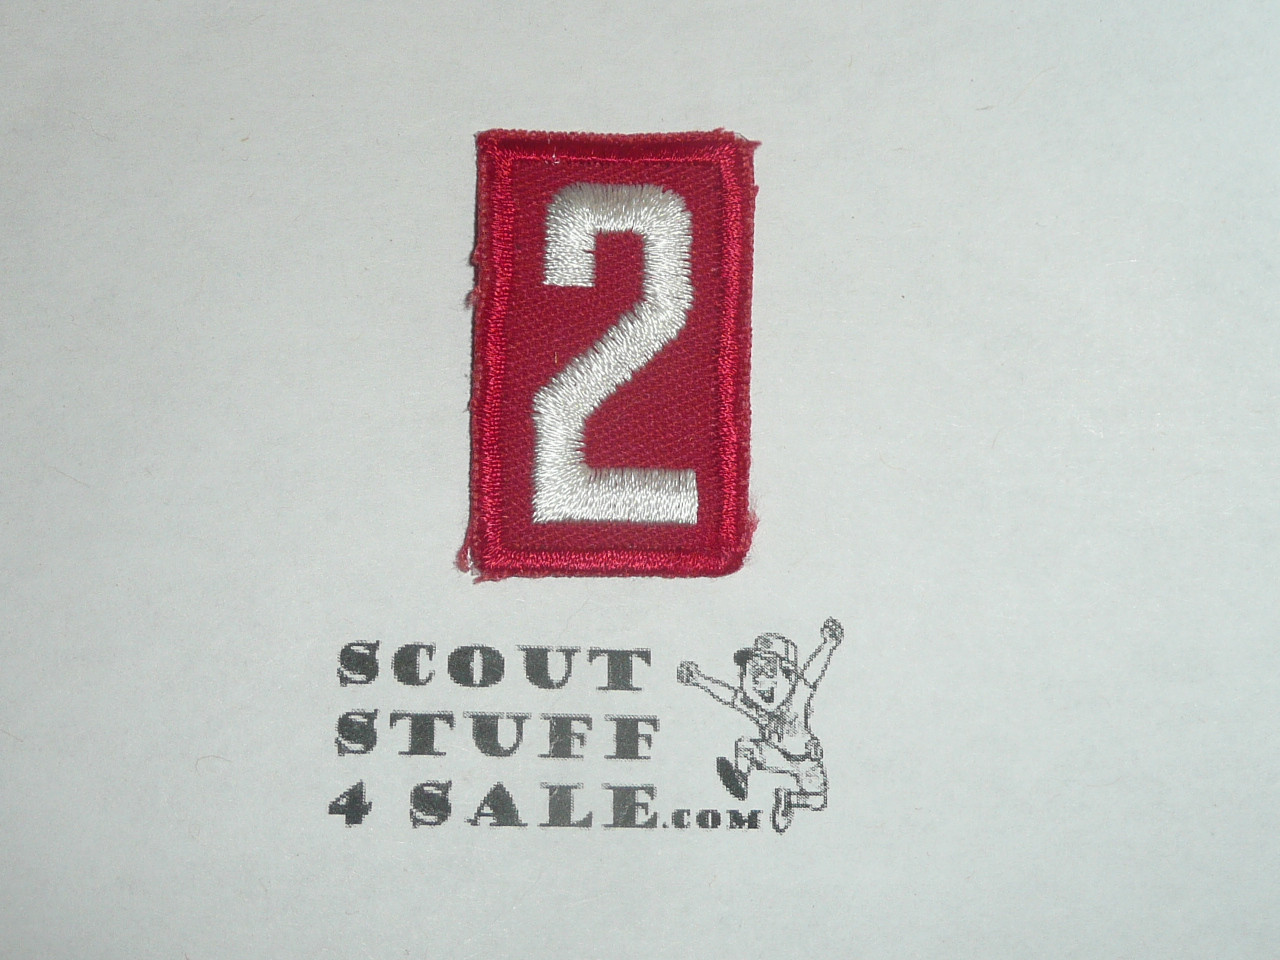 Old Red Troop Numeral "2", twill, used